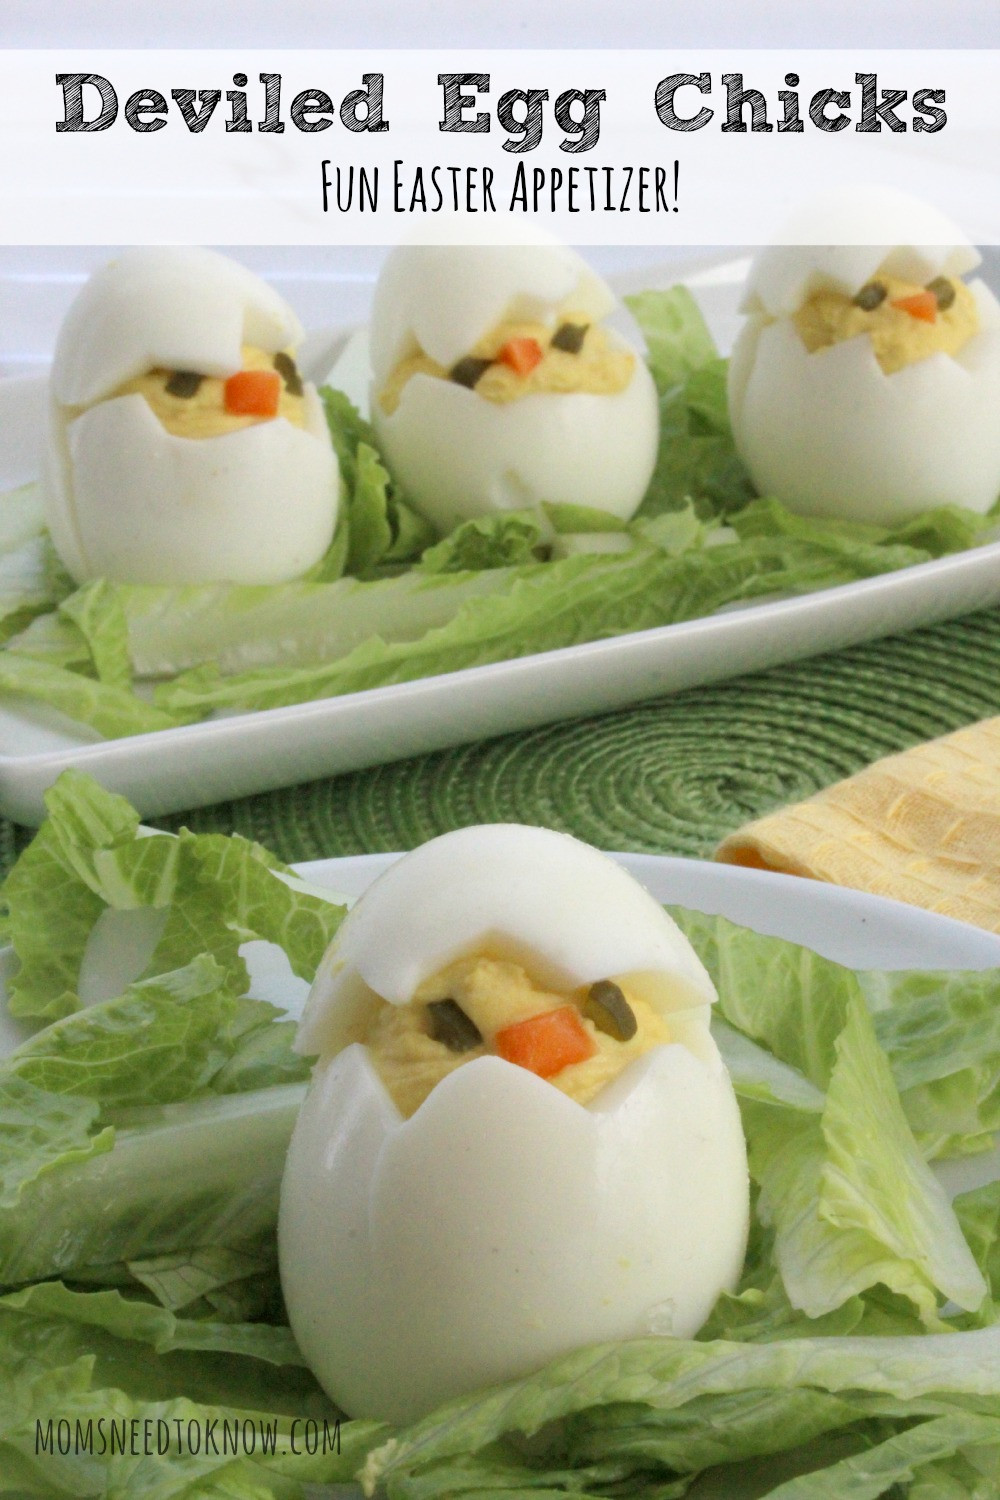 Fun Easter Appetizers
 How to Make Deviled Egg Chicks